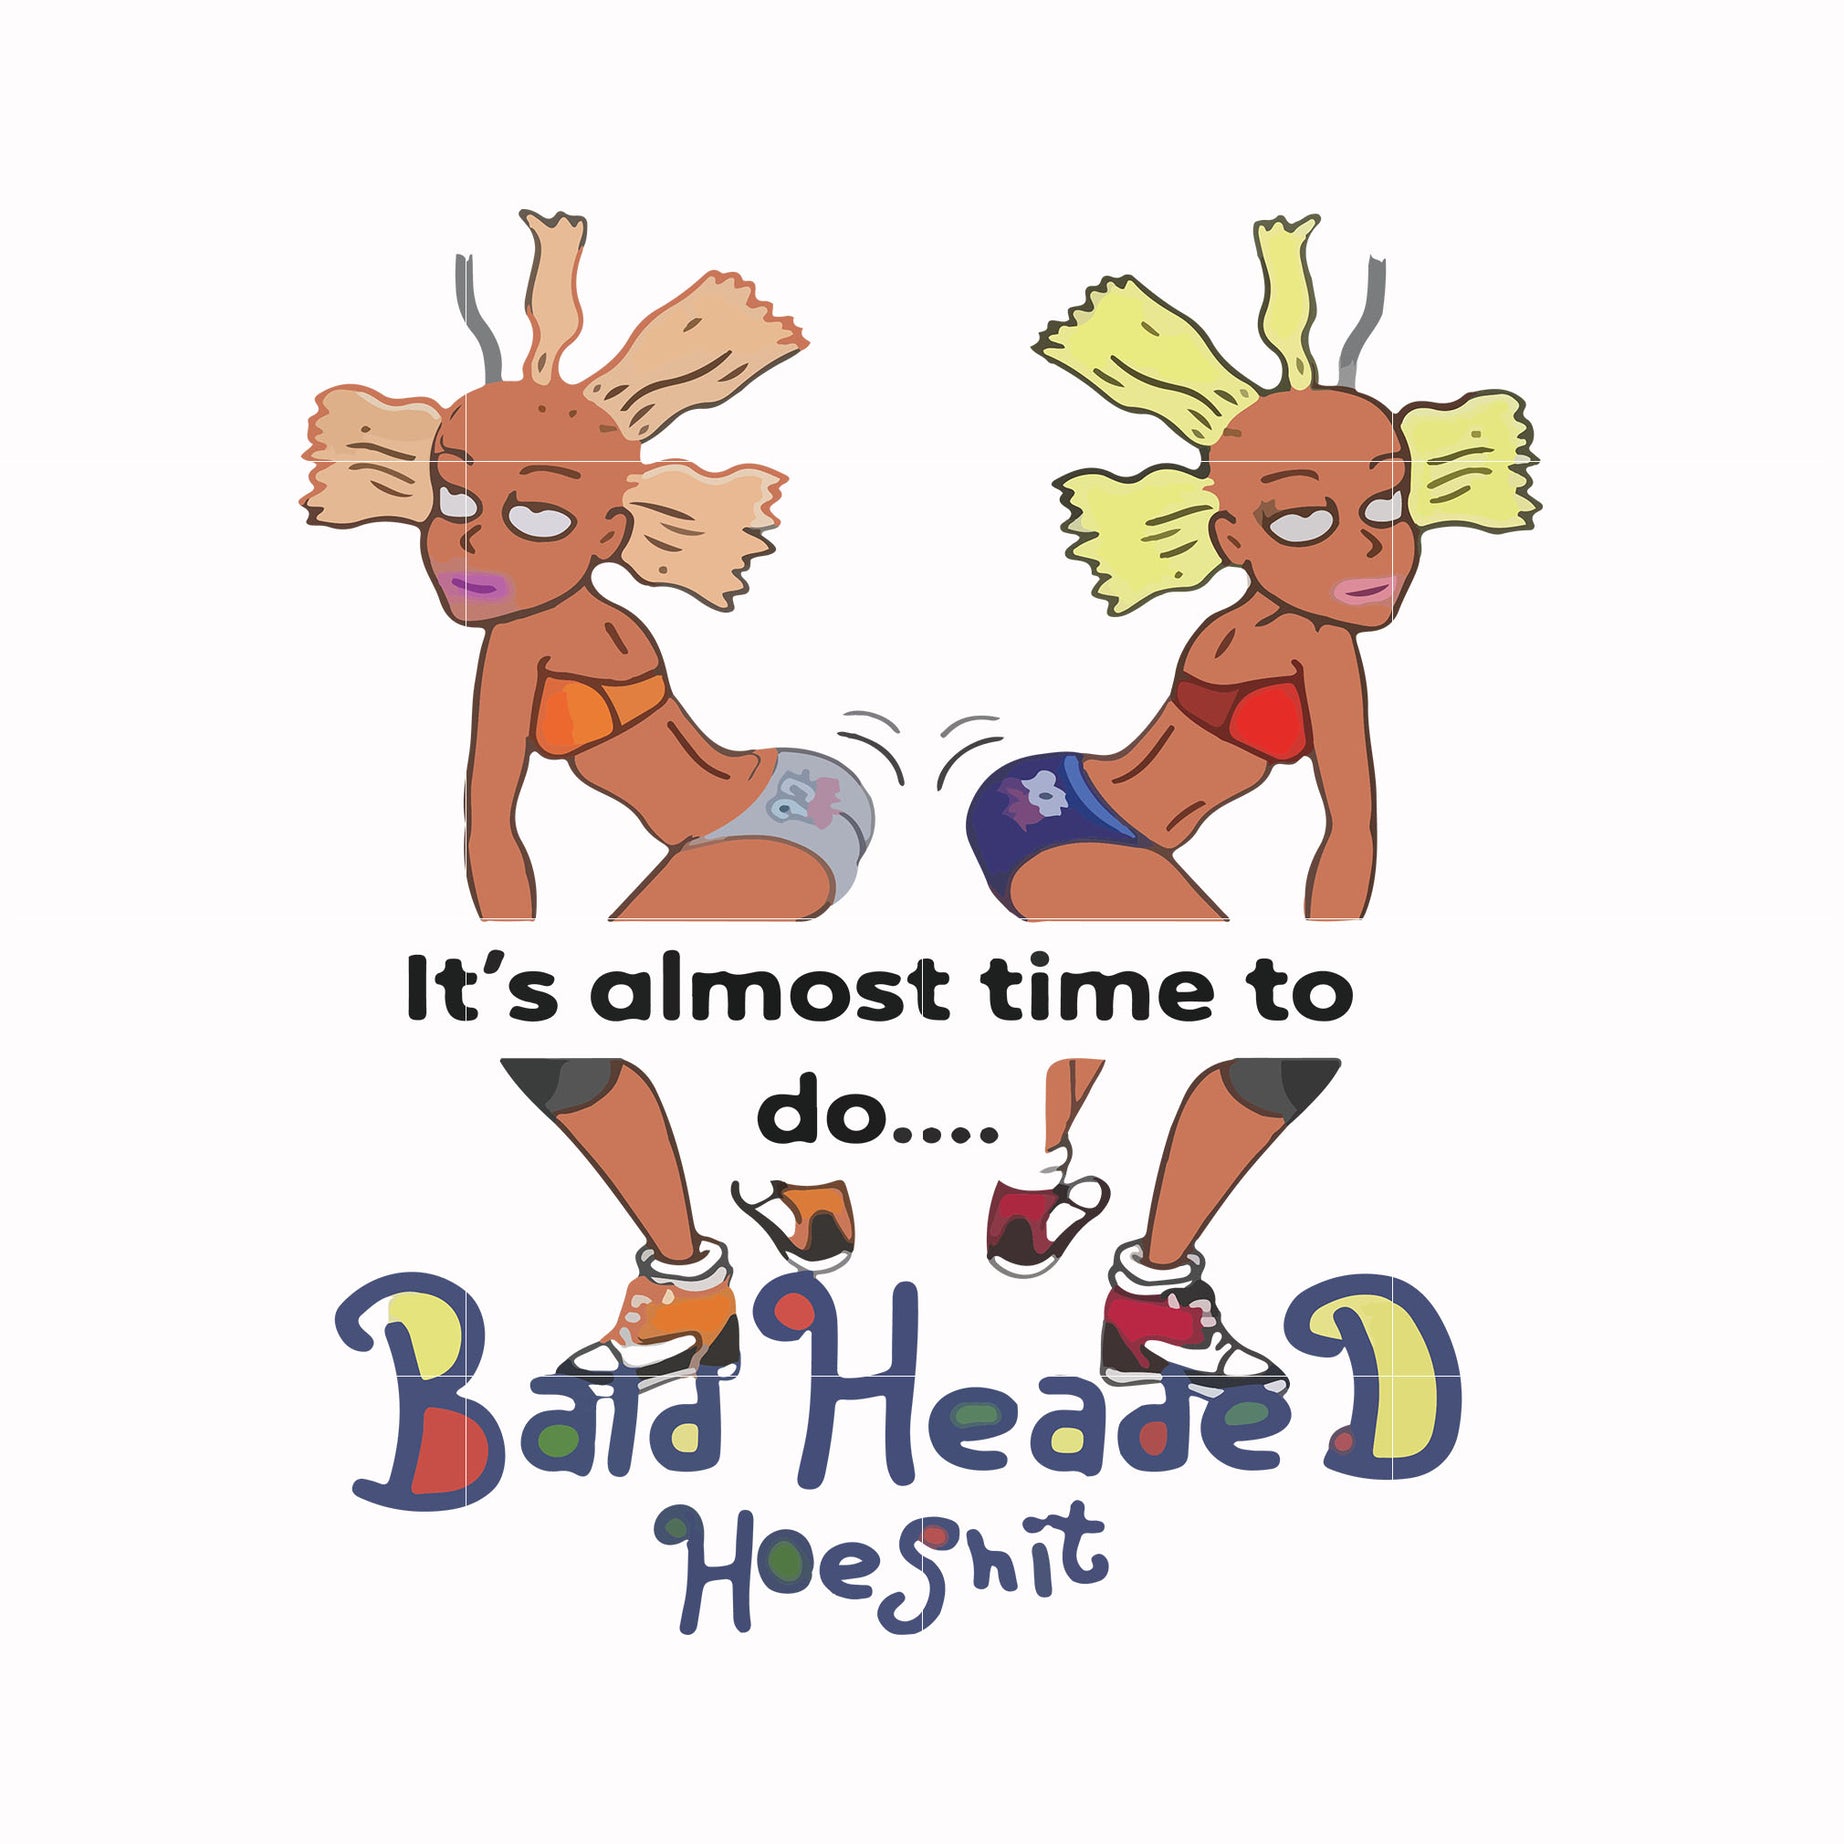 It's almost time to do bald heade hoeshit svg, png, dxf, eps file FN000810